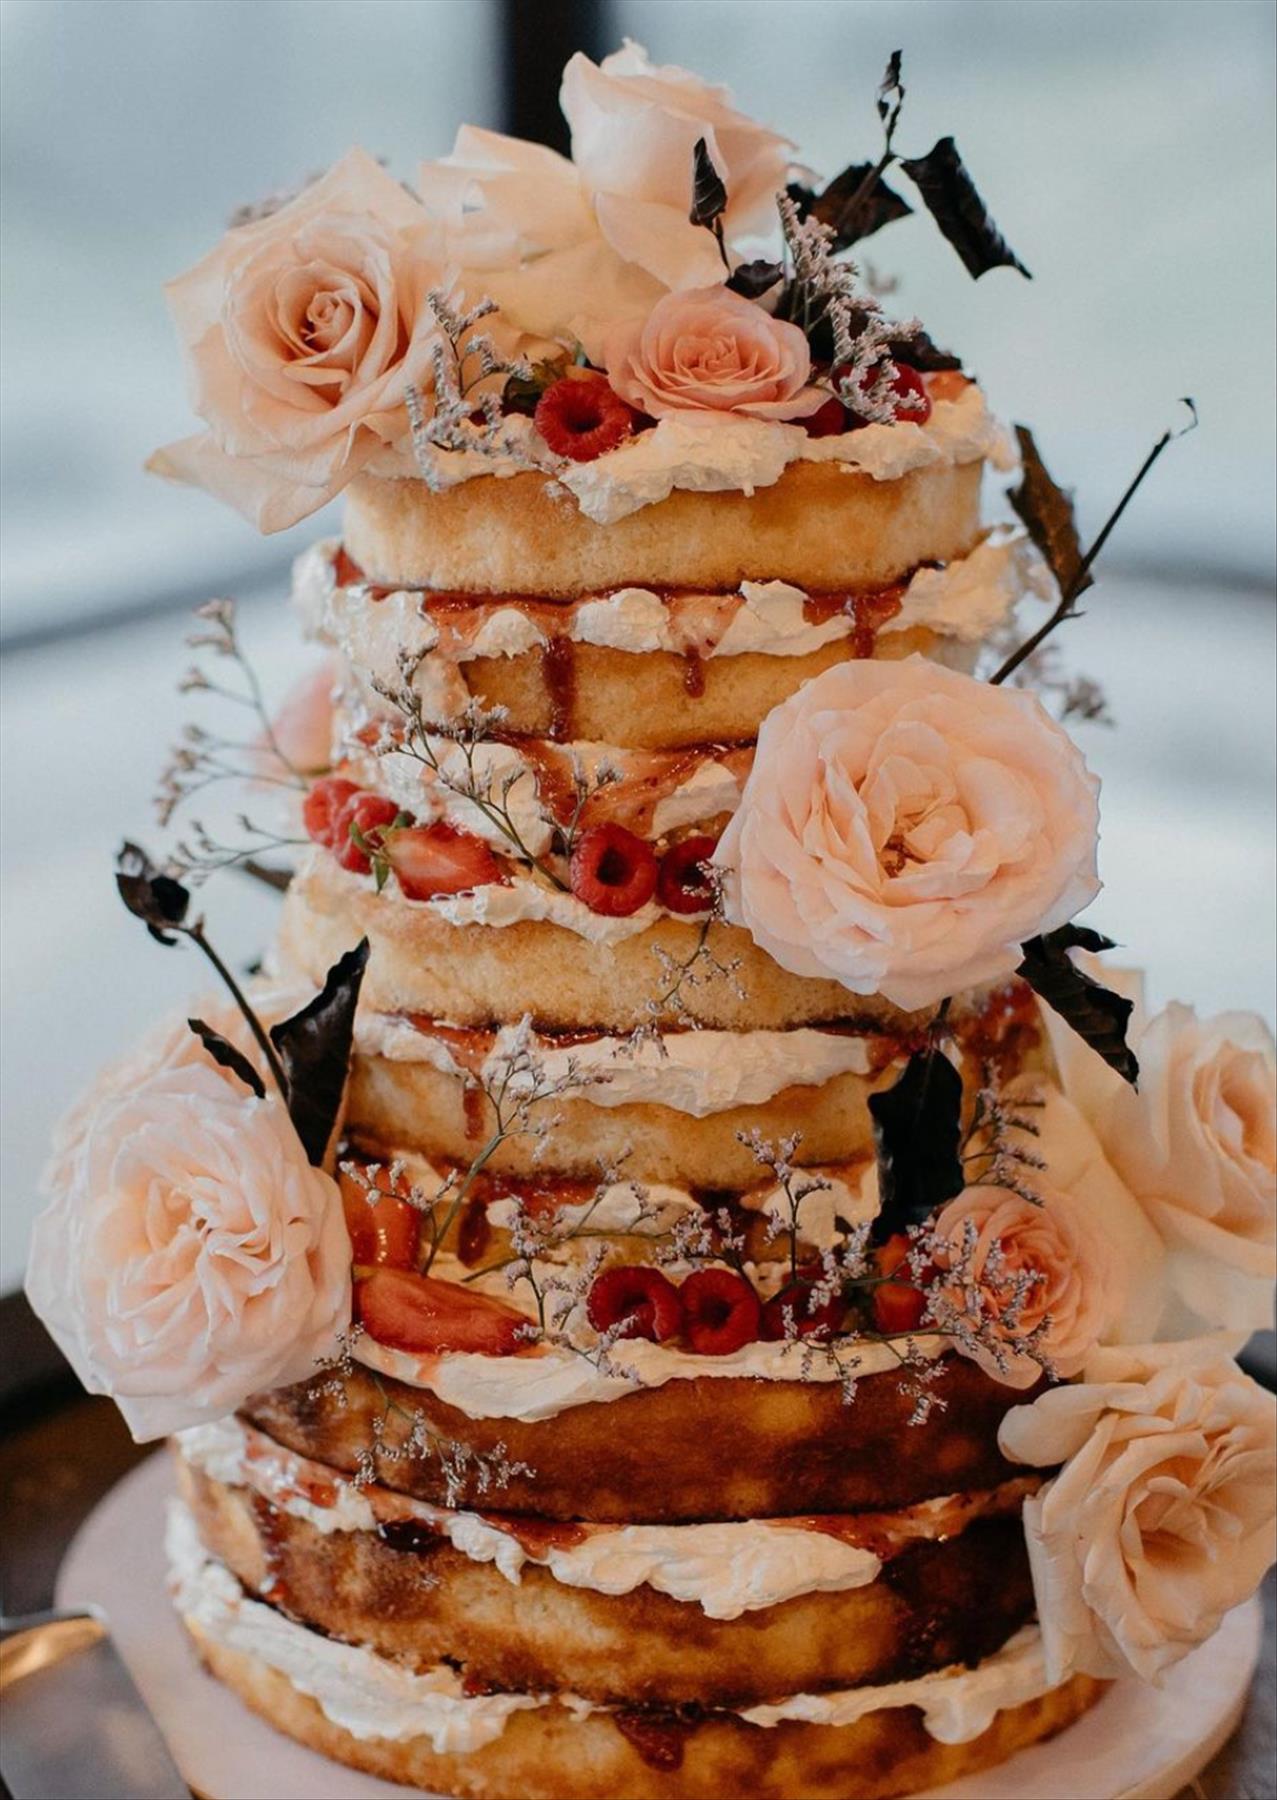 44 Sweet Wedding Cake Trends 2022 You Want to Steal